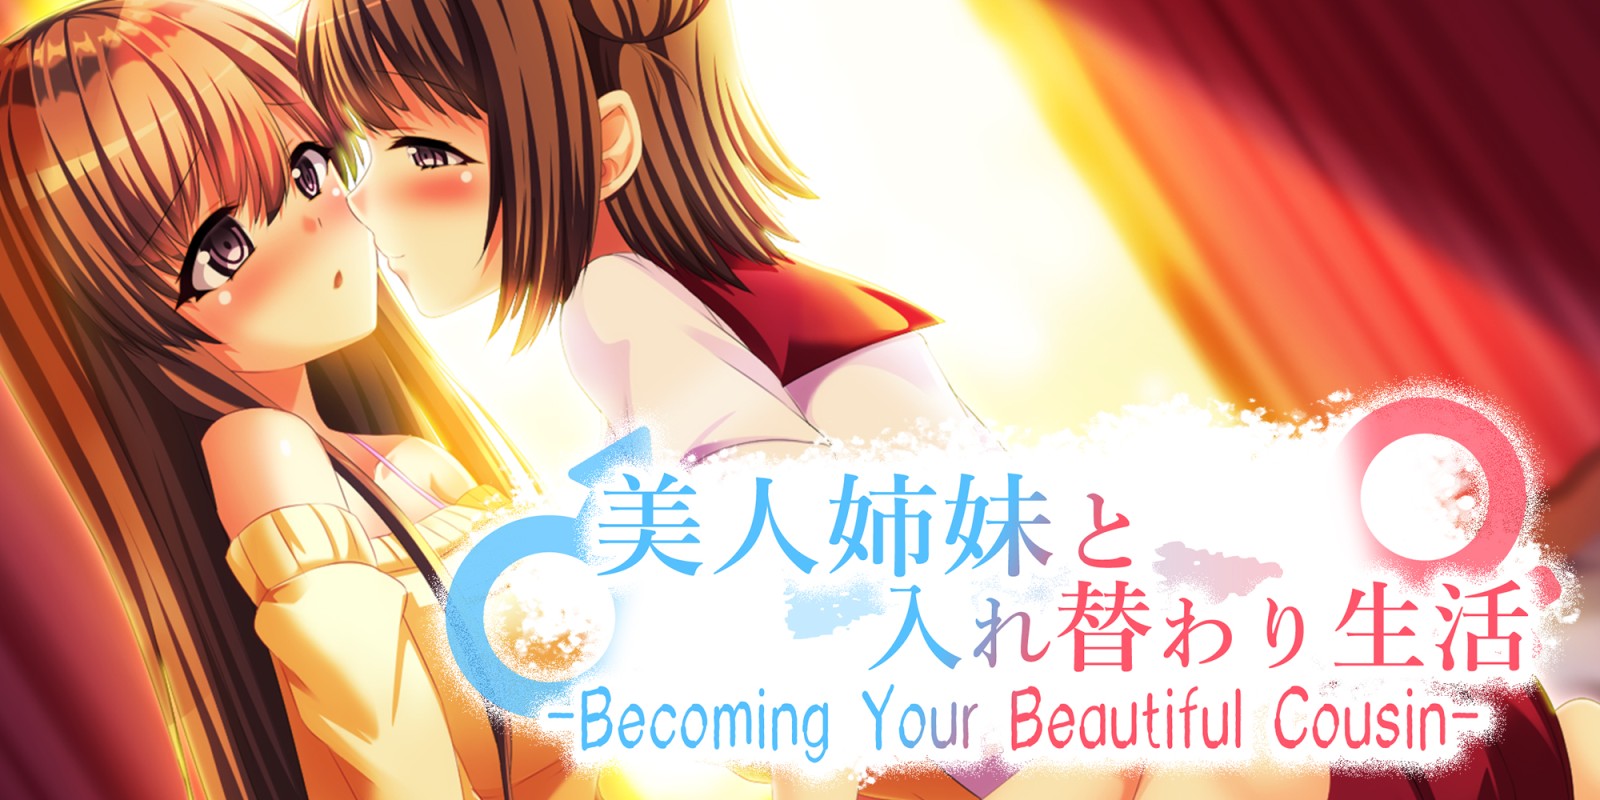 -Becoming Your Beautiful Cousin- 美人姉妹と入れ替わり生活